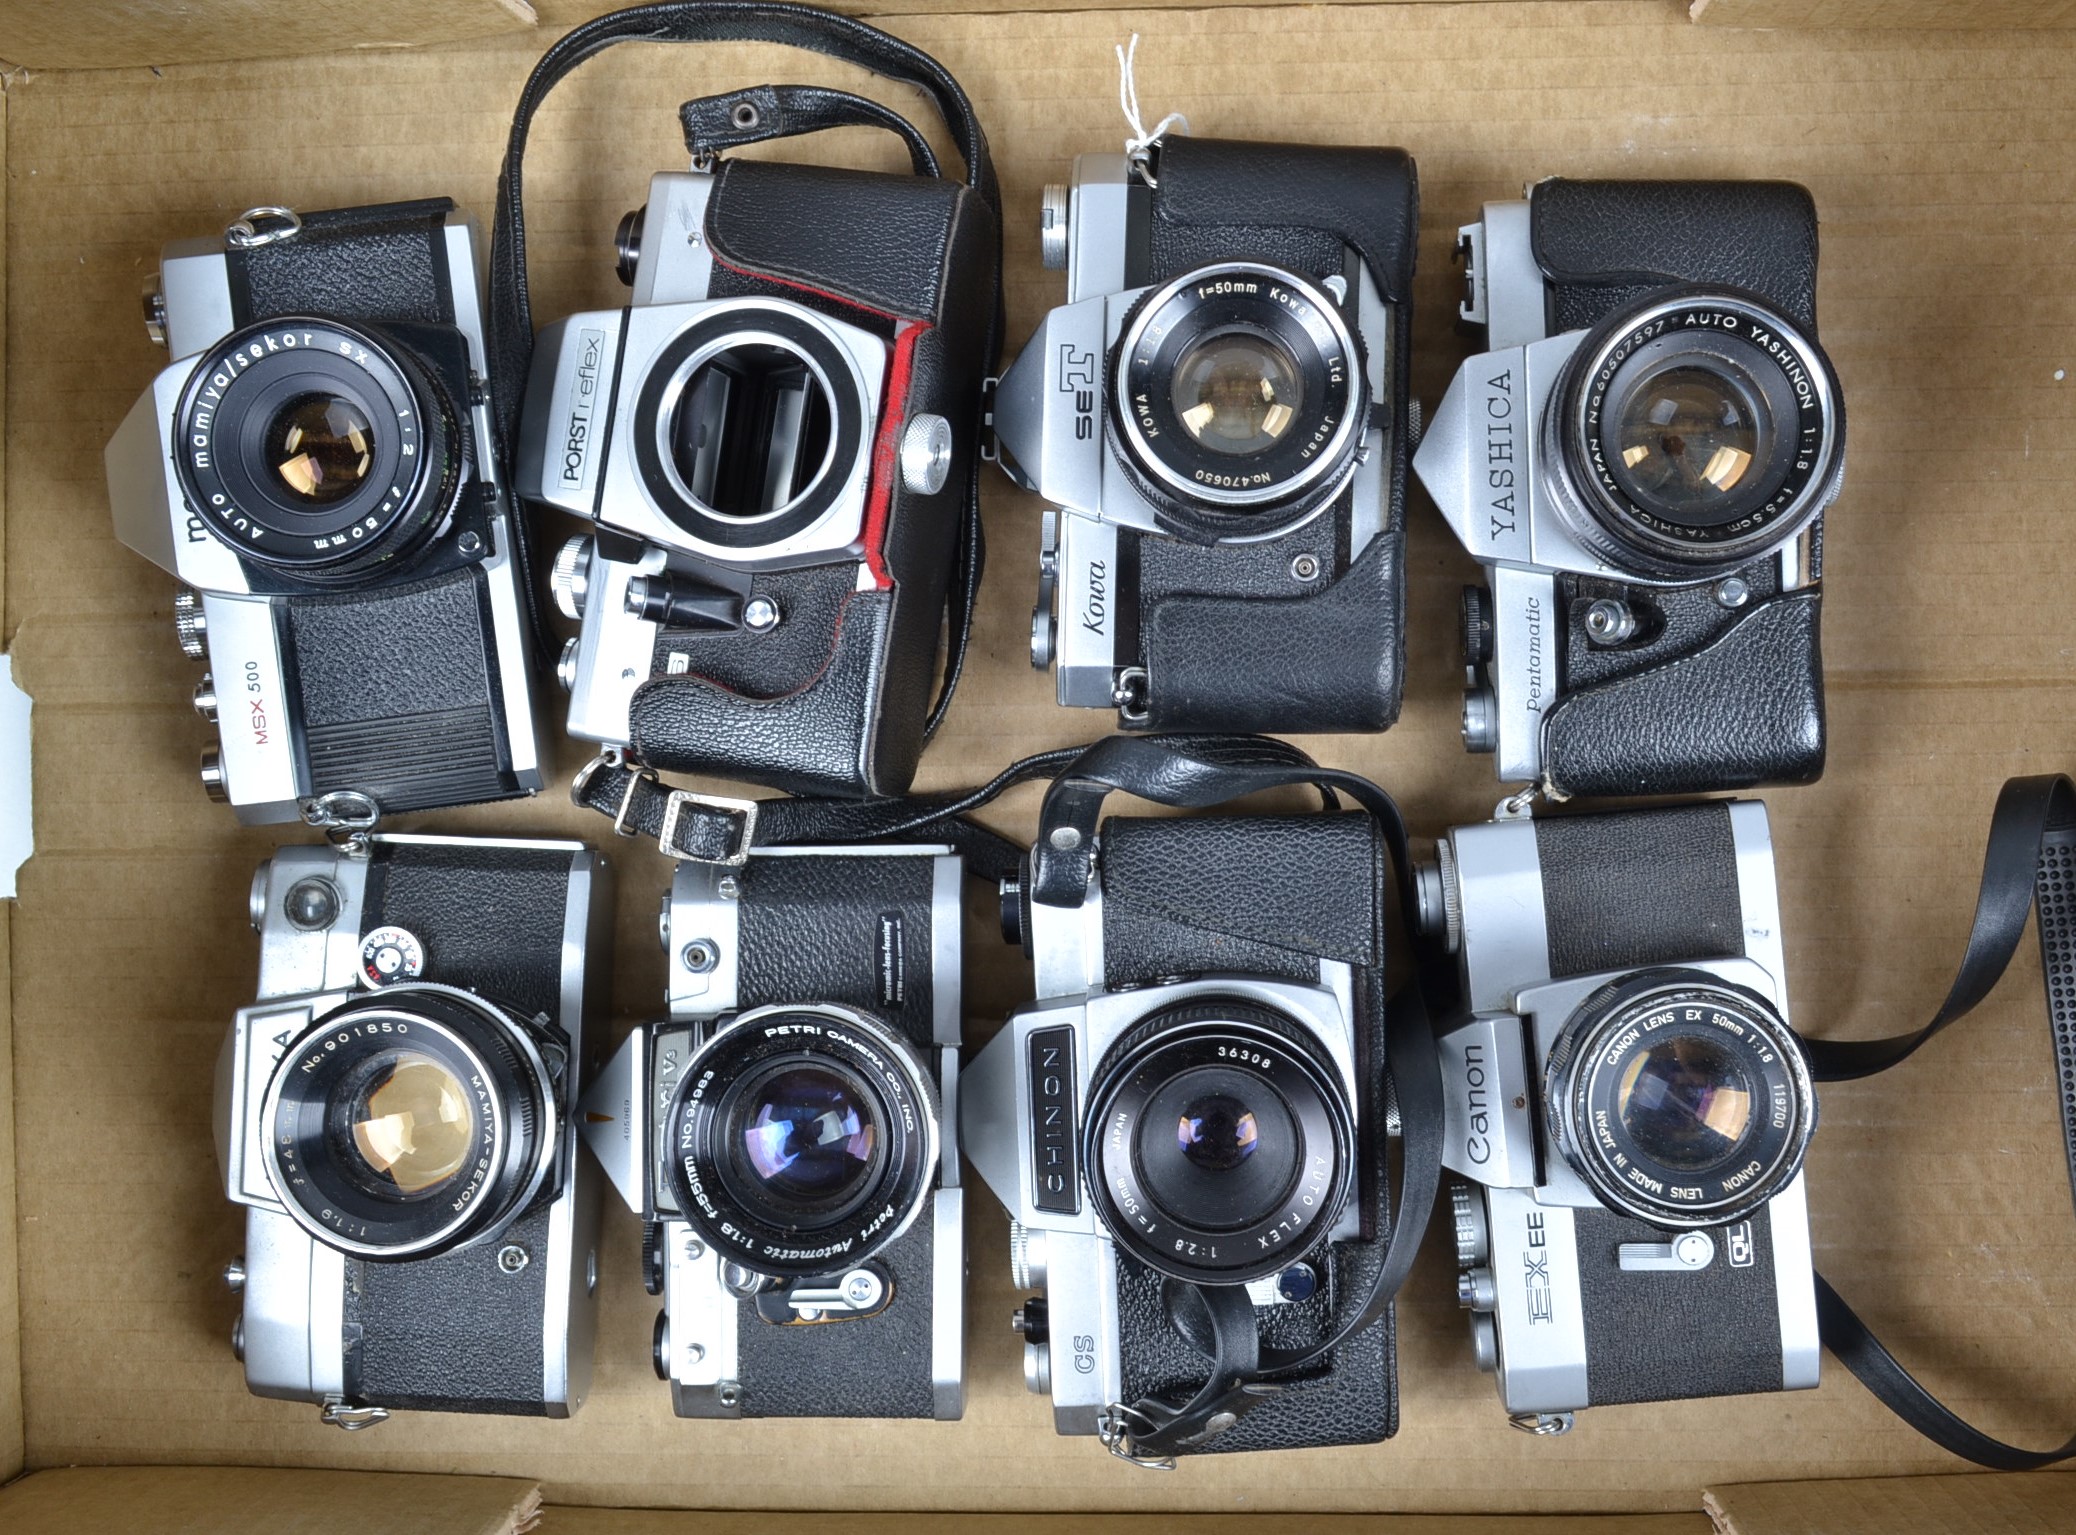 A Tray of SLR Cameras, including a Canon EX EE, with 50mm f/1.8 EX lens, Mamiya MSX 500, with 50mm